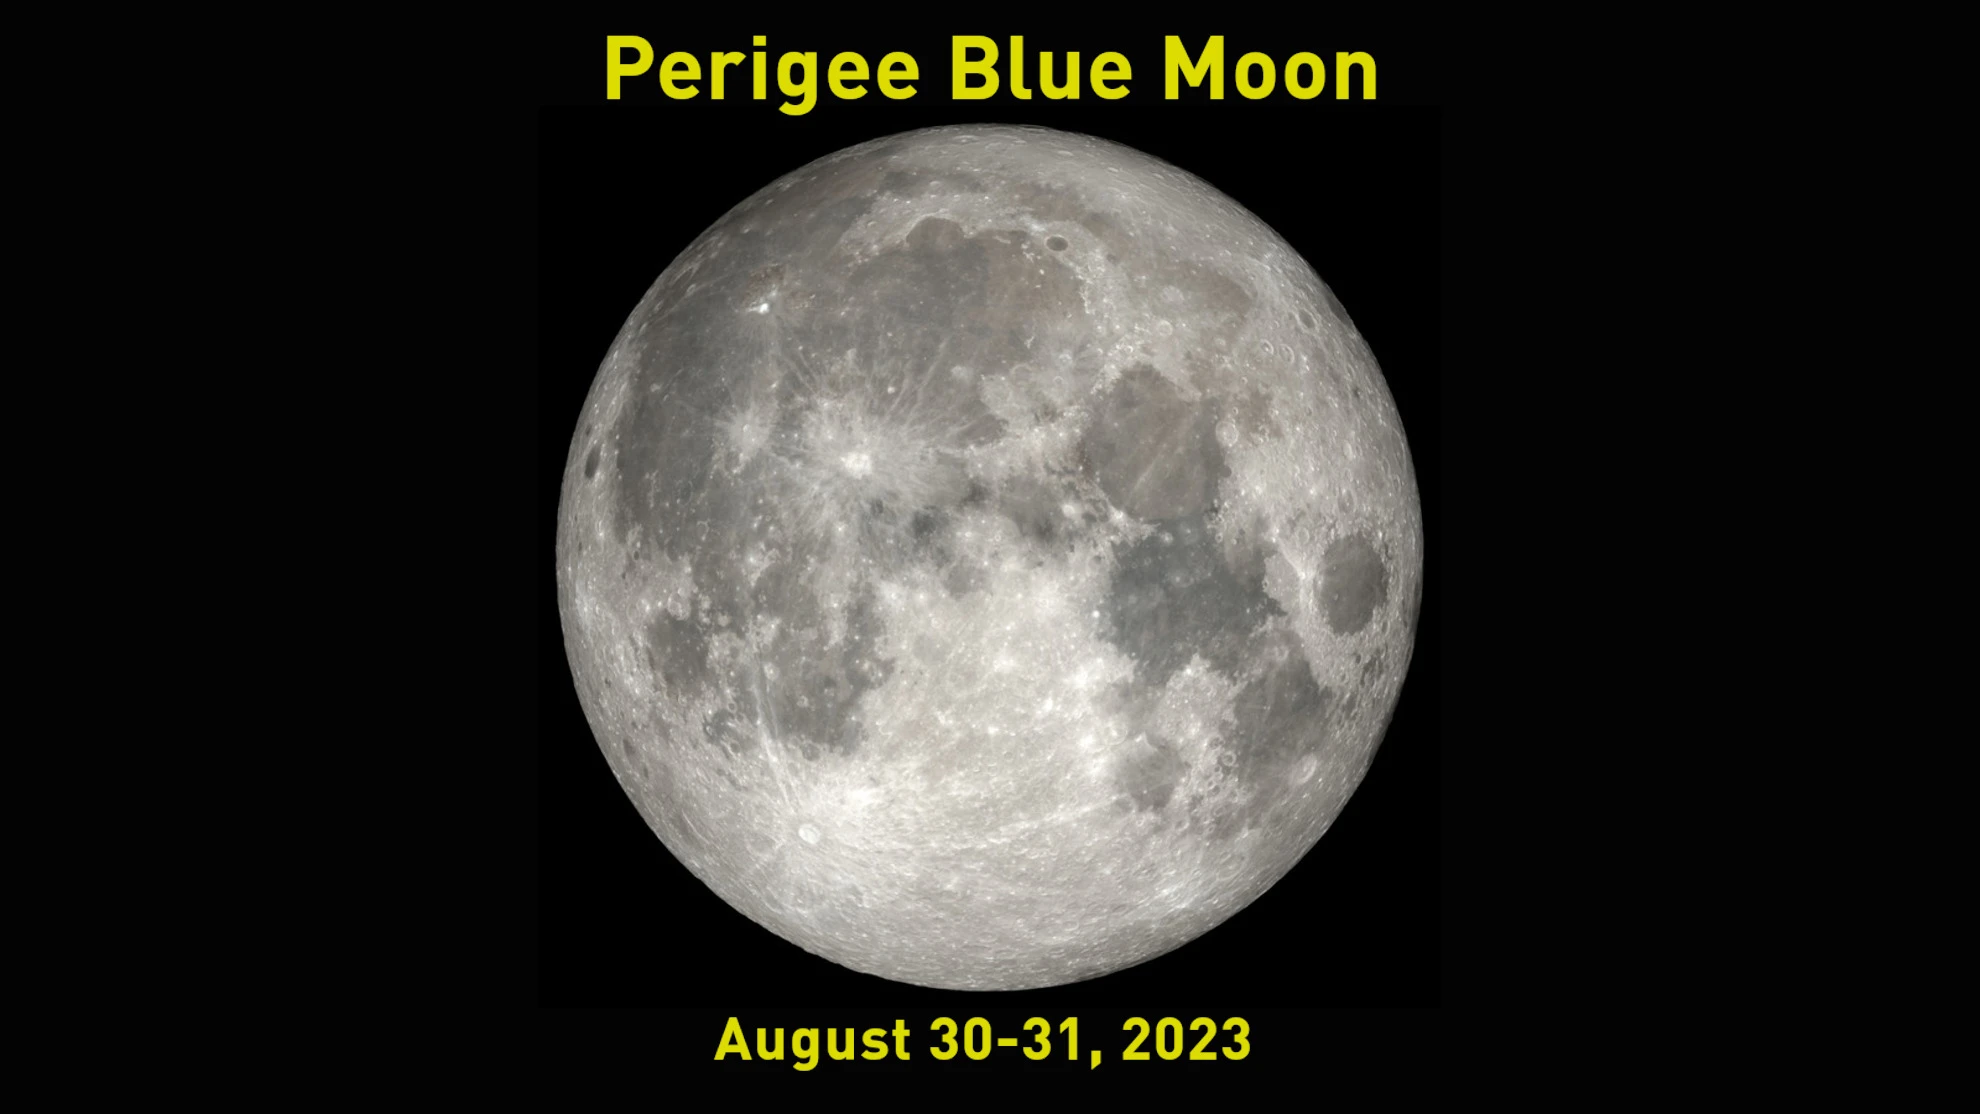 Eyes to the sky tonight to see the super-rare Perigee Blue Moon